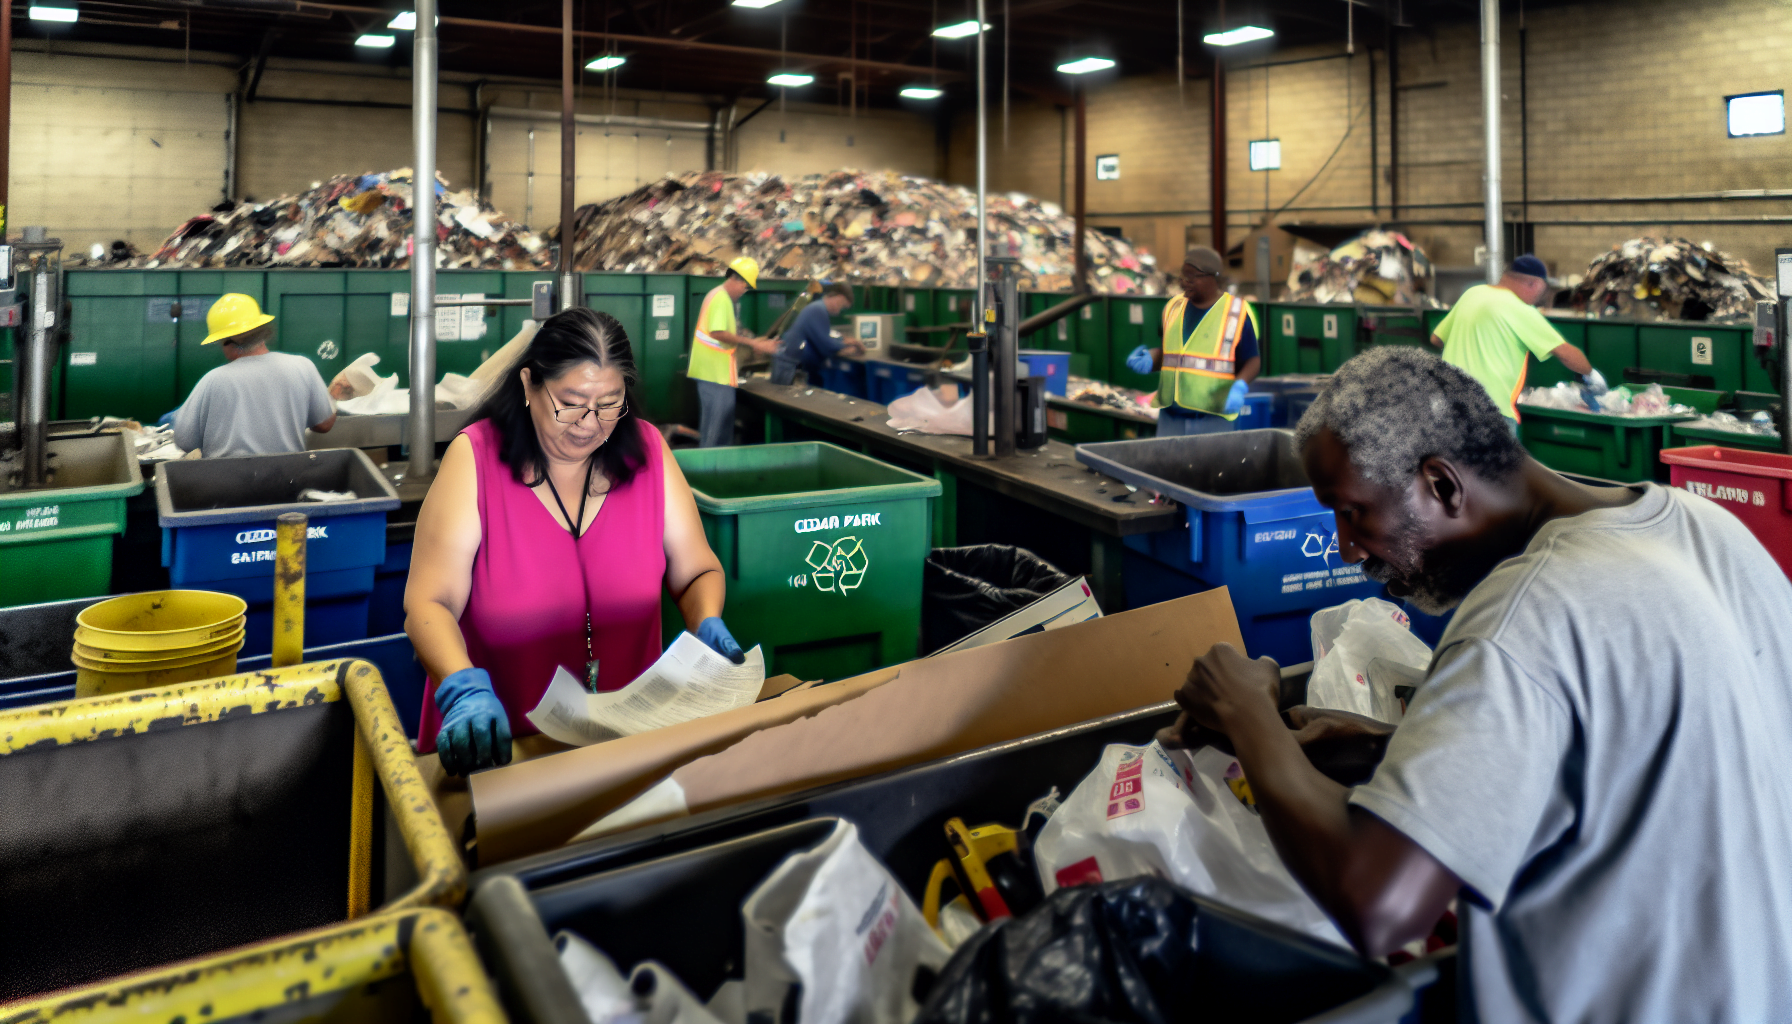 Recycling center in Cedar Park with workers sorting recyclable materials